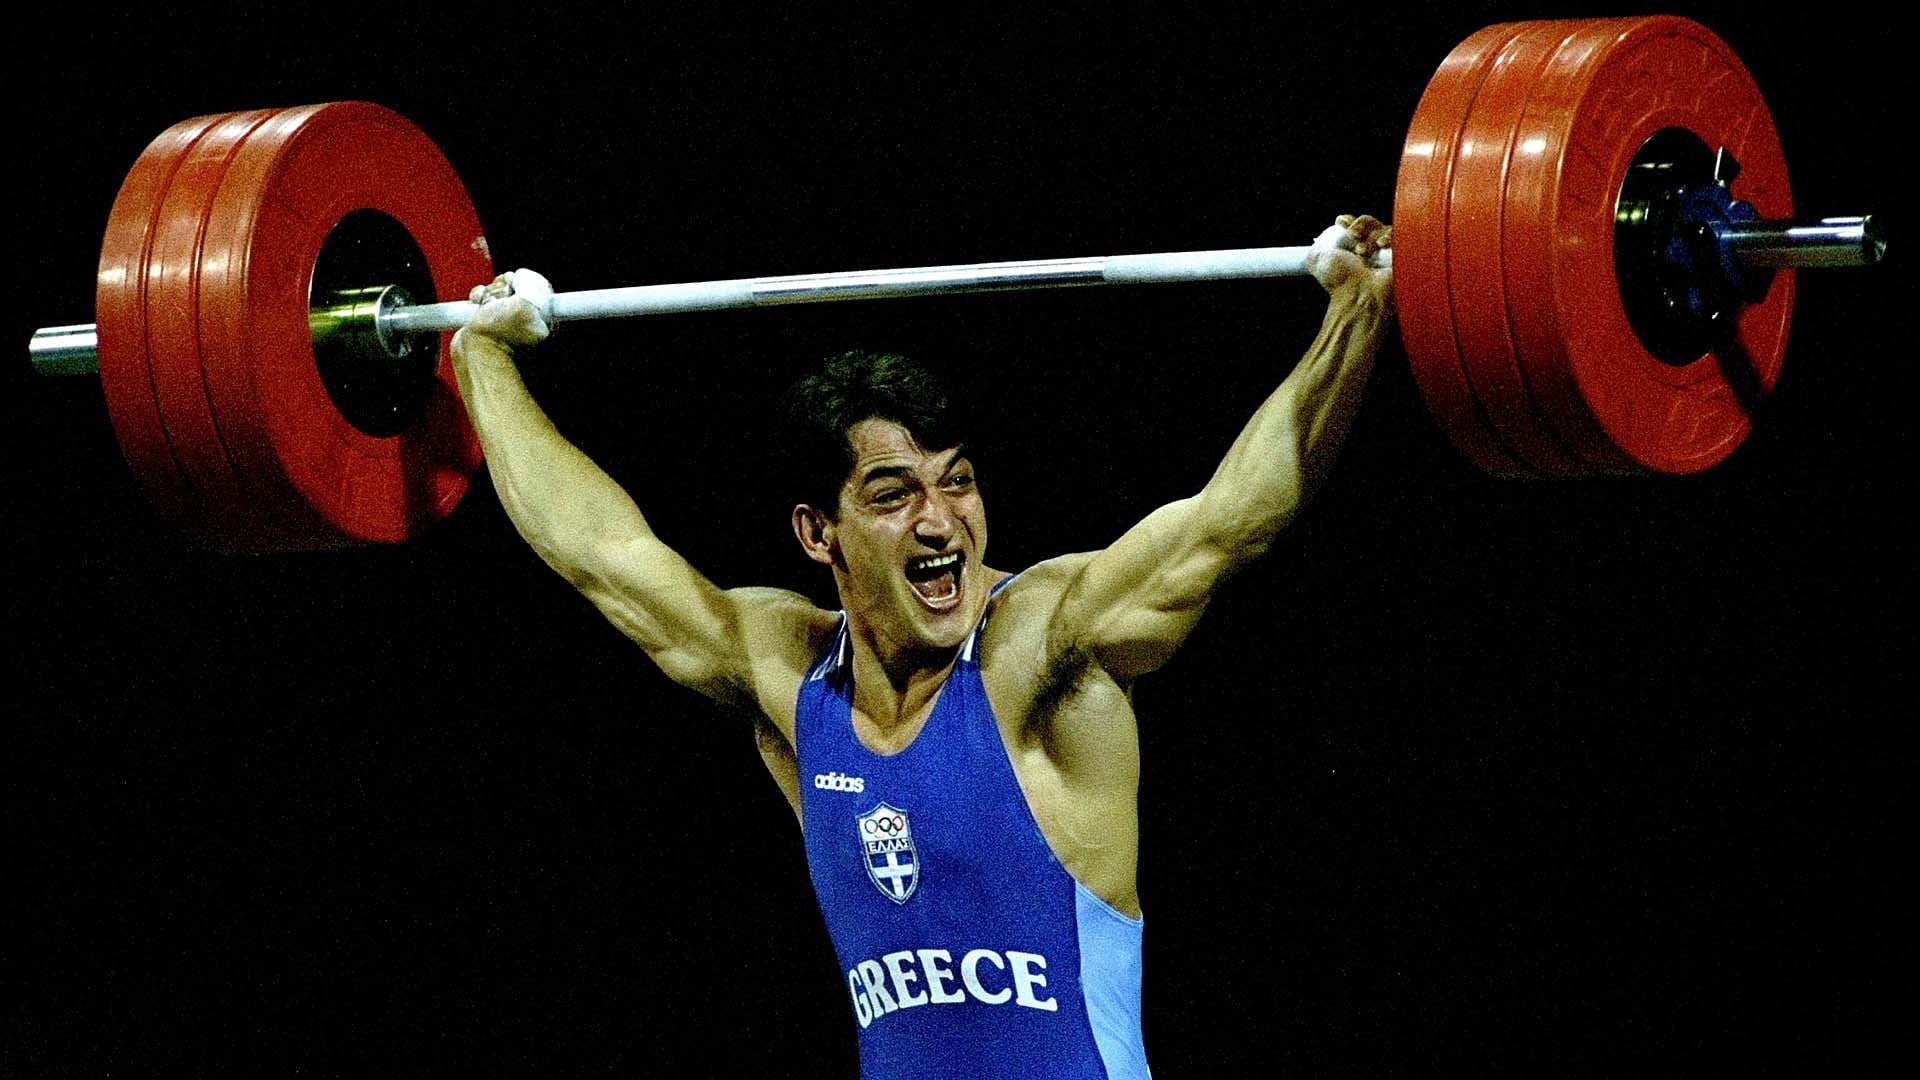 Weightlifting: Pyrros Dimas, A Greek politician and former weightlifter, Participation in the World Games. 1920x1080 Full HD Wallpaper.